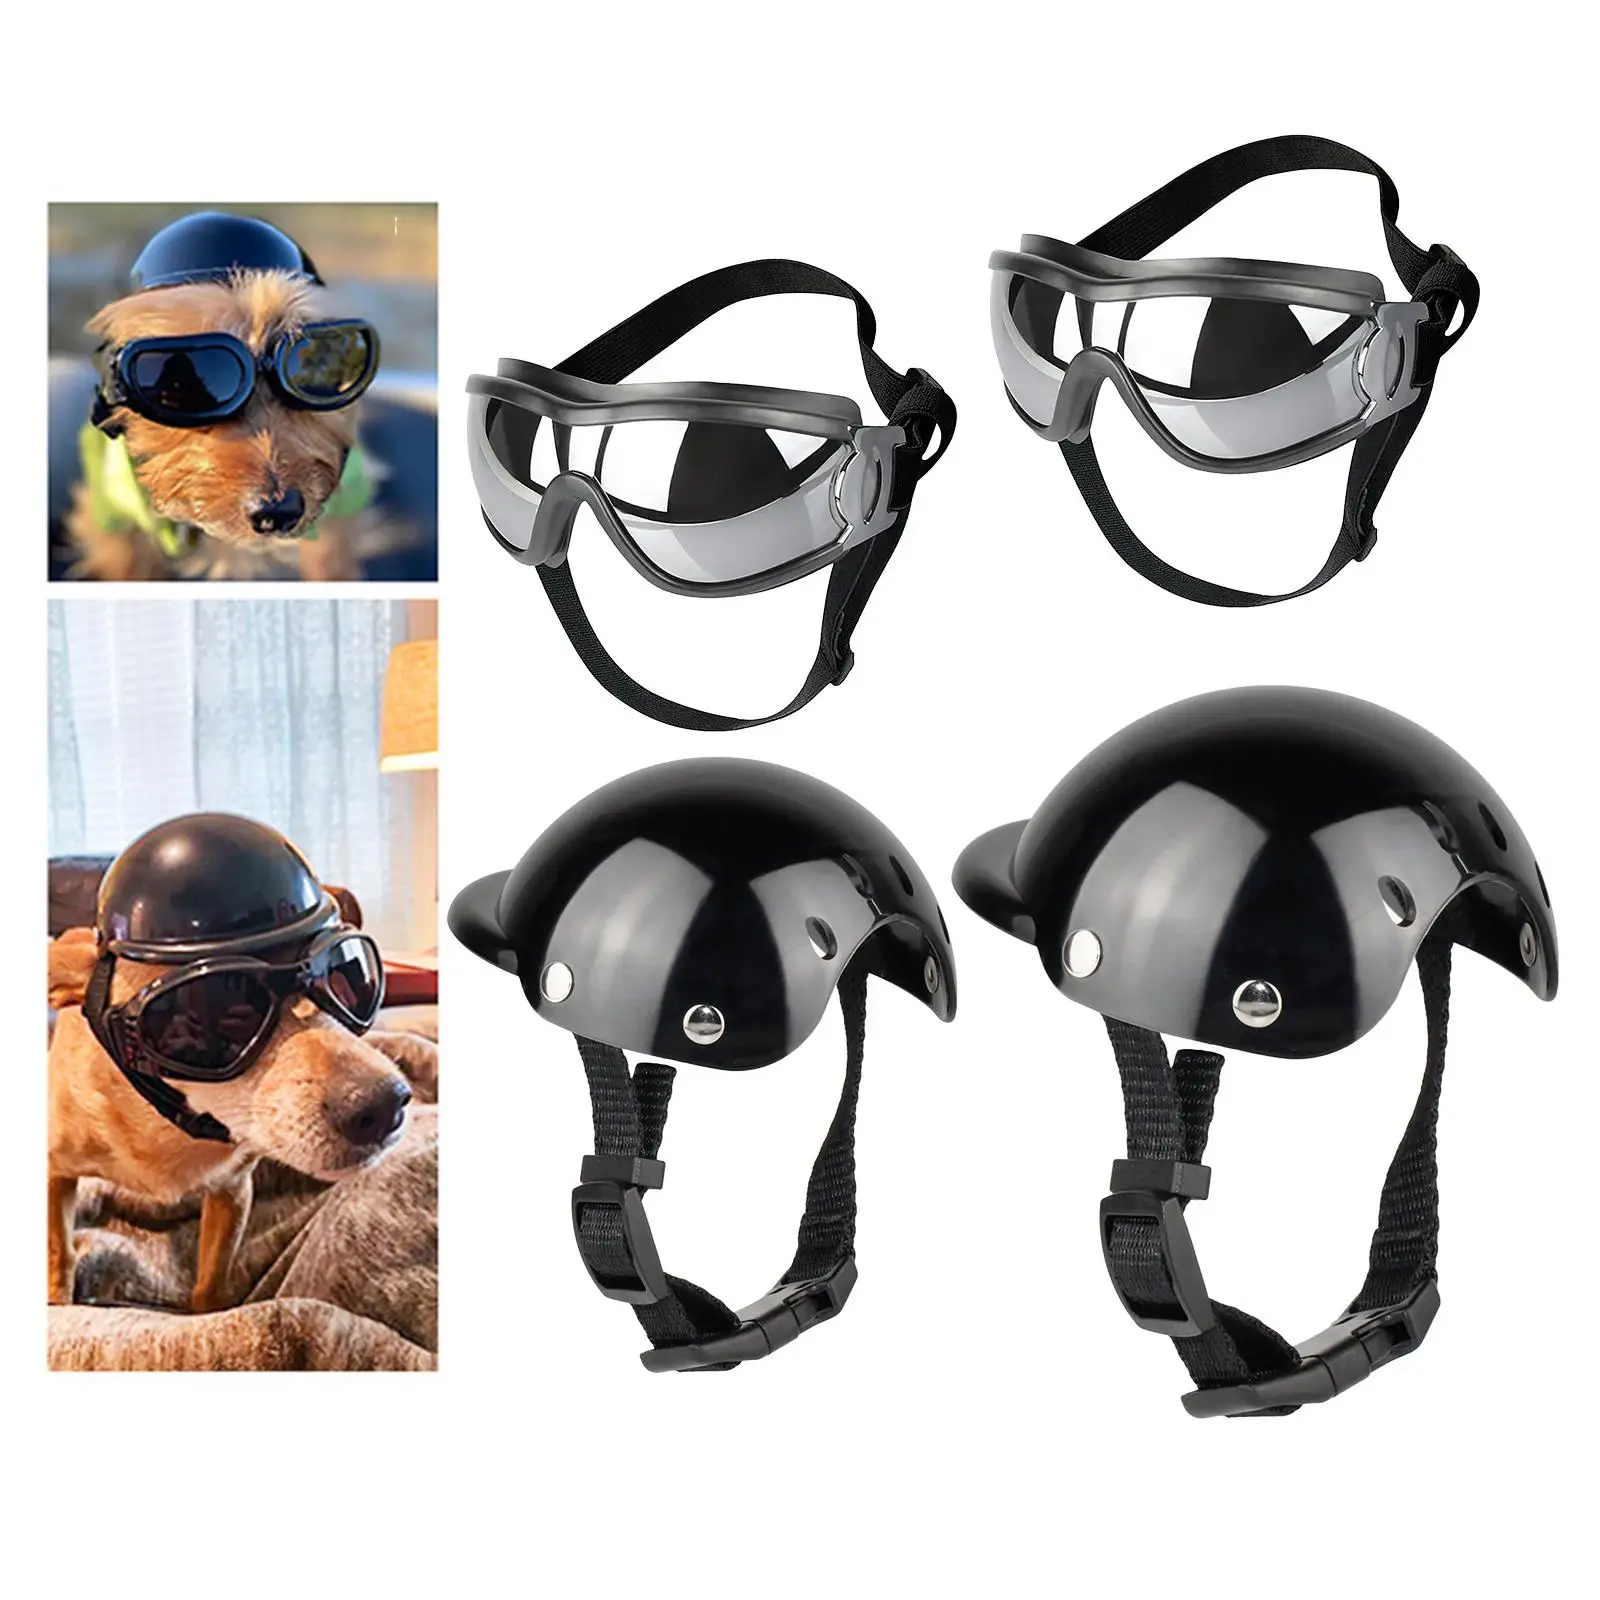  Dog Hat Breathable Sunglasses Hats Adjustable Puppy Sun Hat For Small Dogs Outdoor Walking Dogs Supplies Costumes